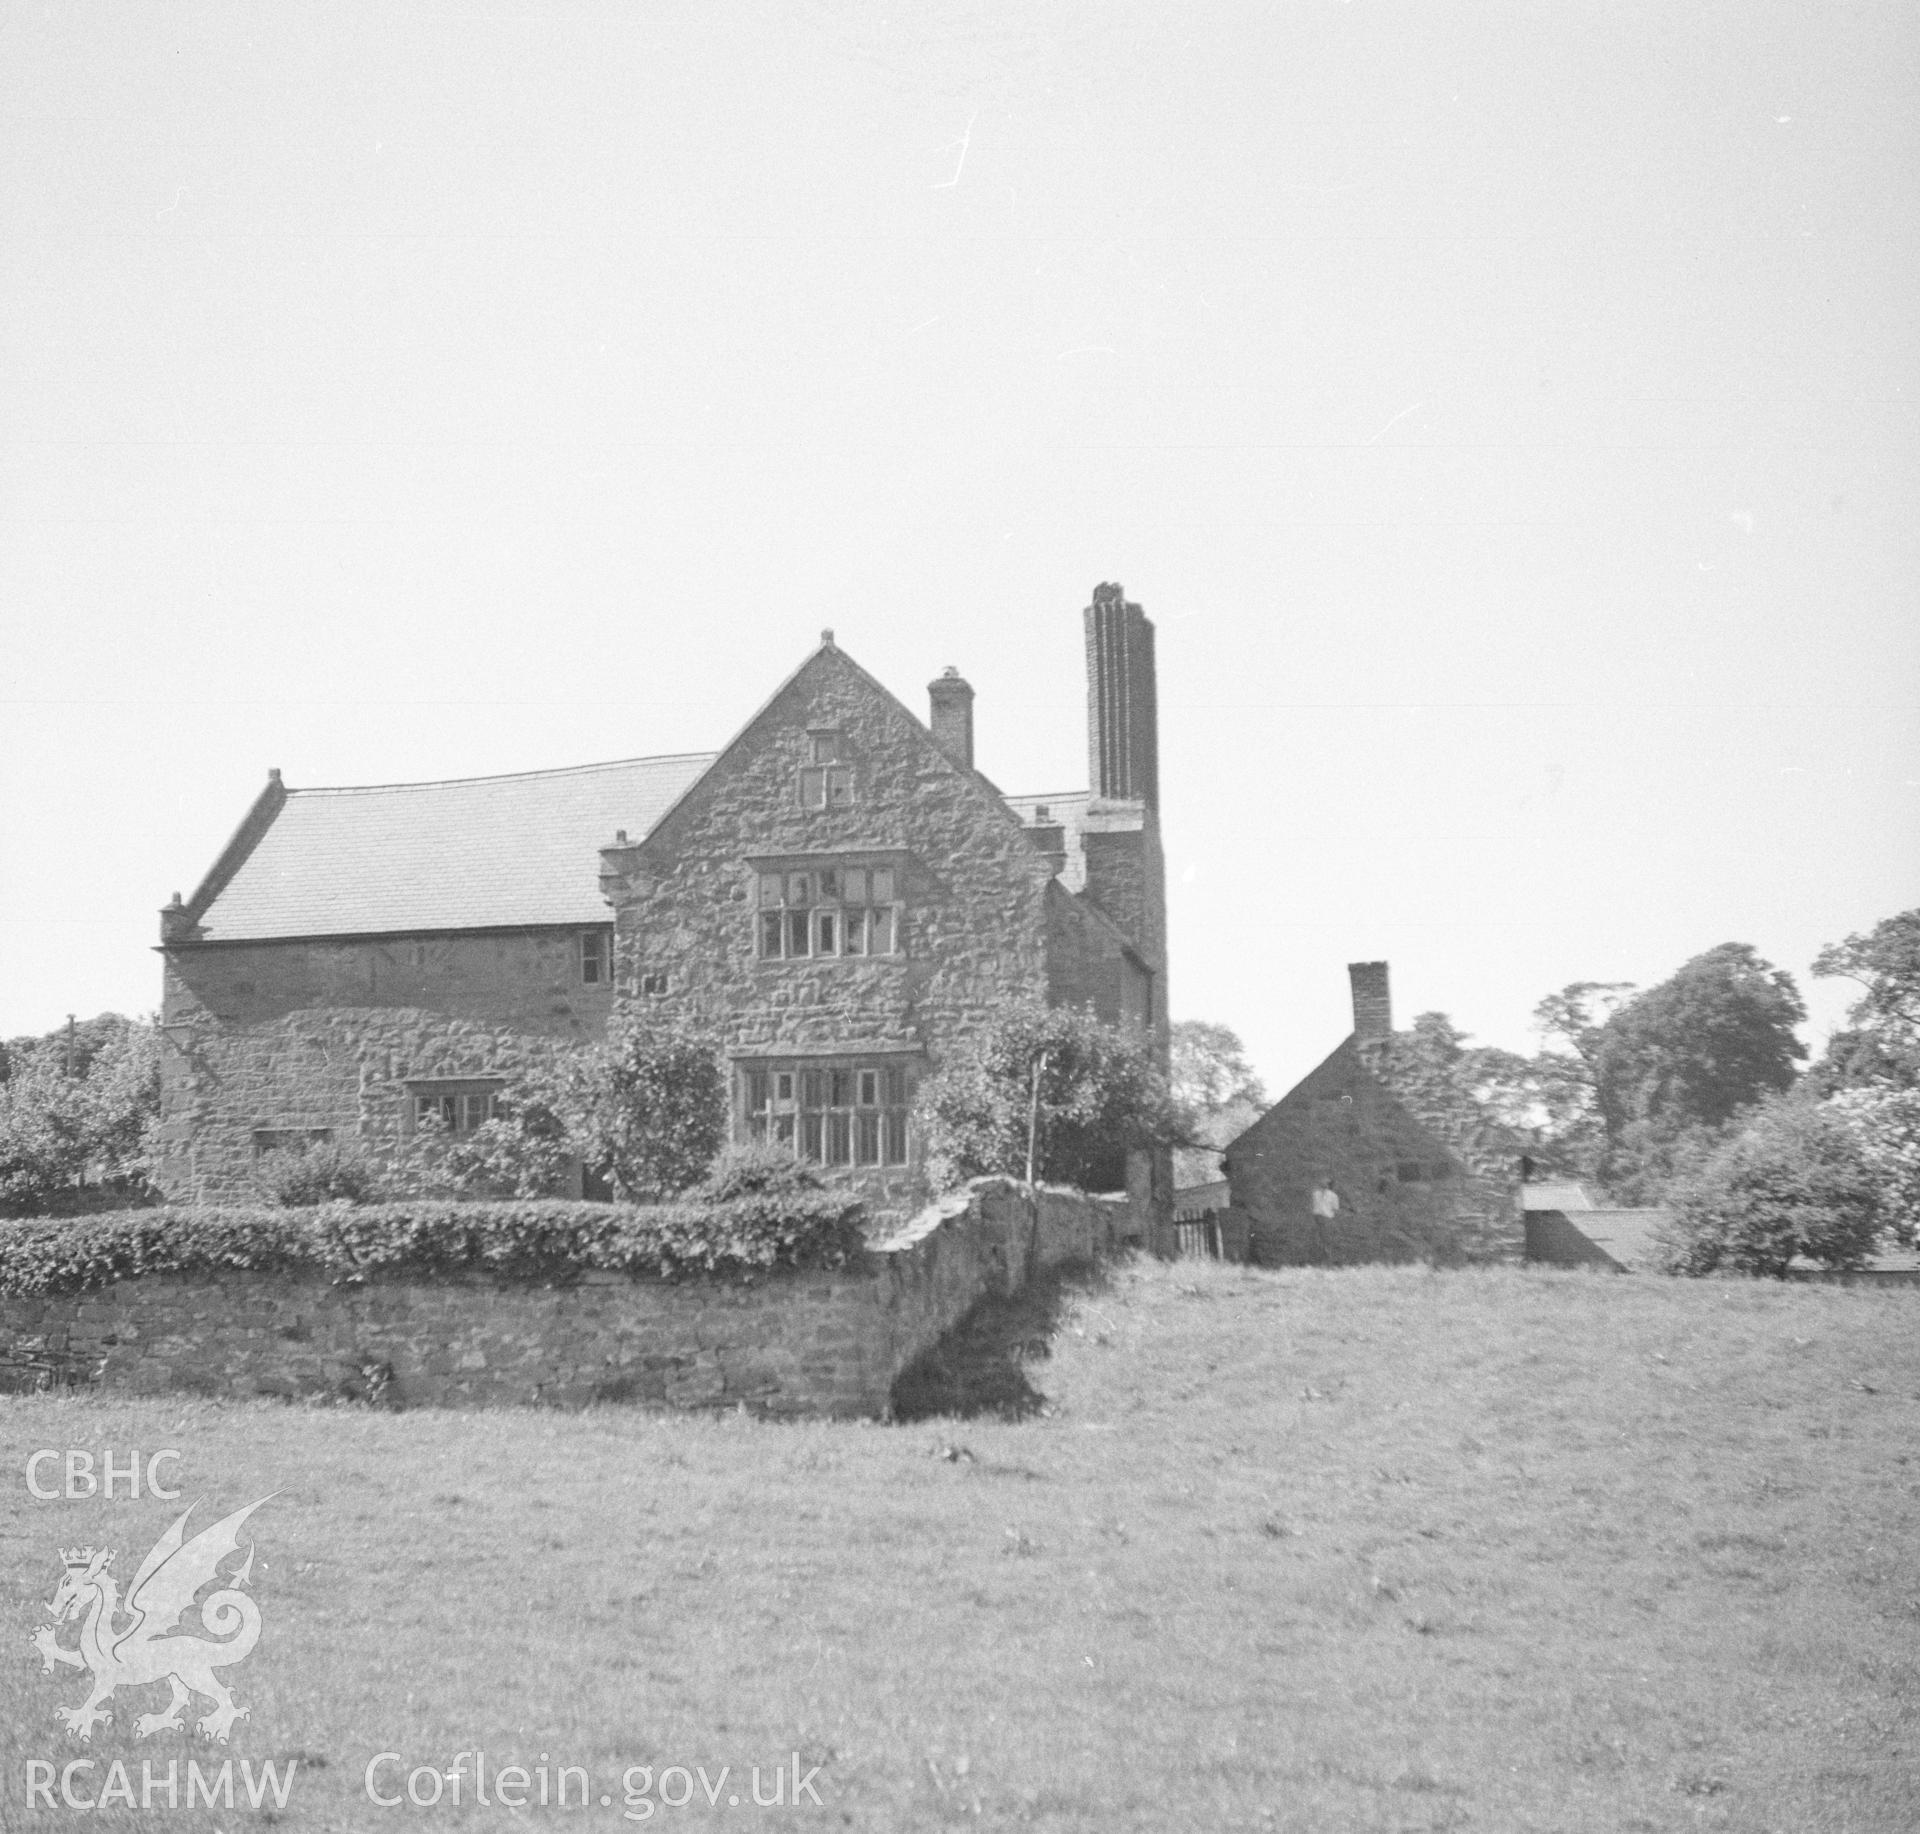 Black and white nitrate negative showing exterior view of Fferm House in its setting.